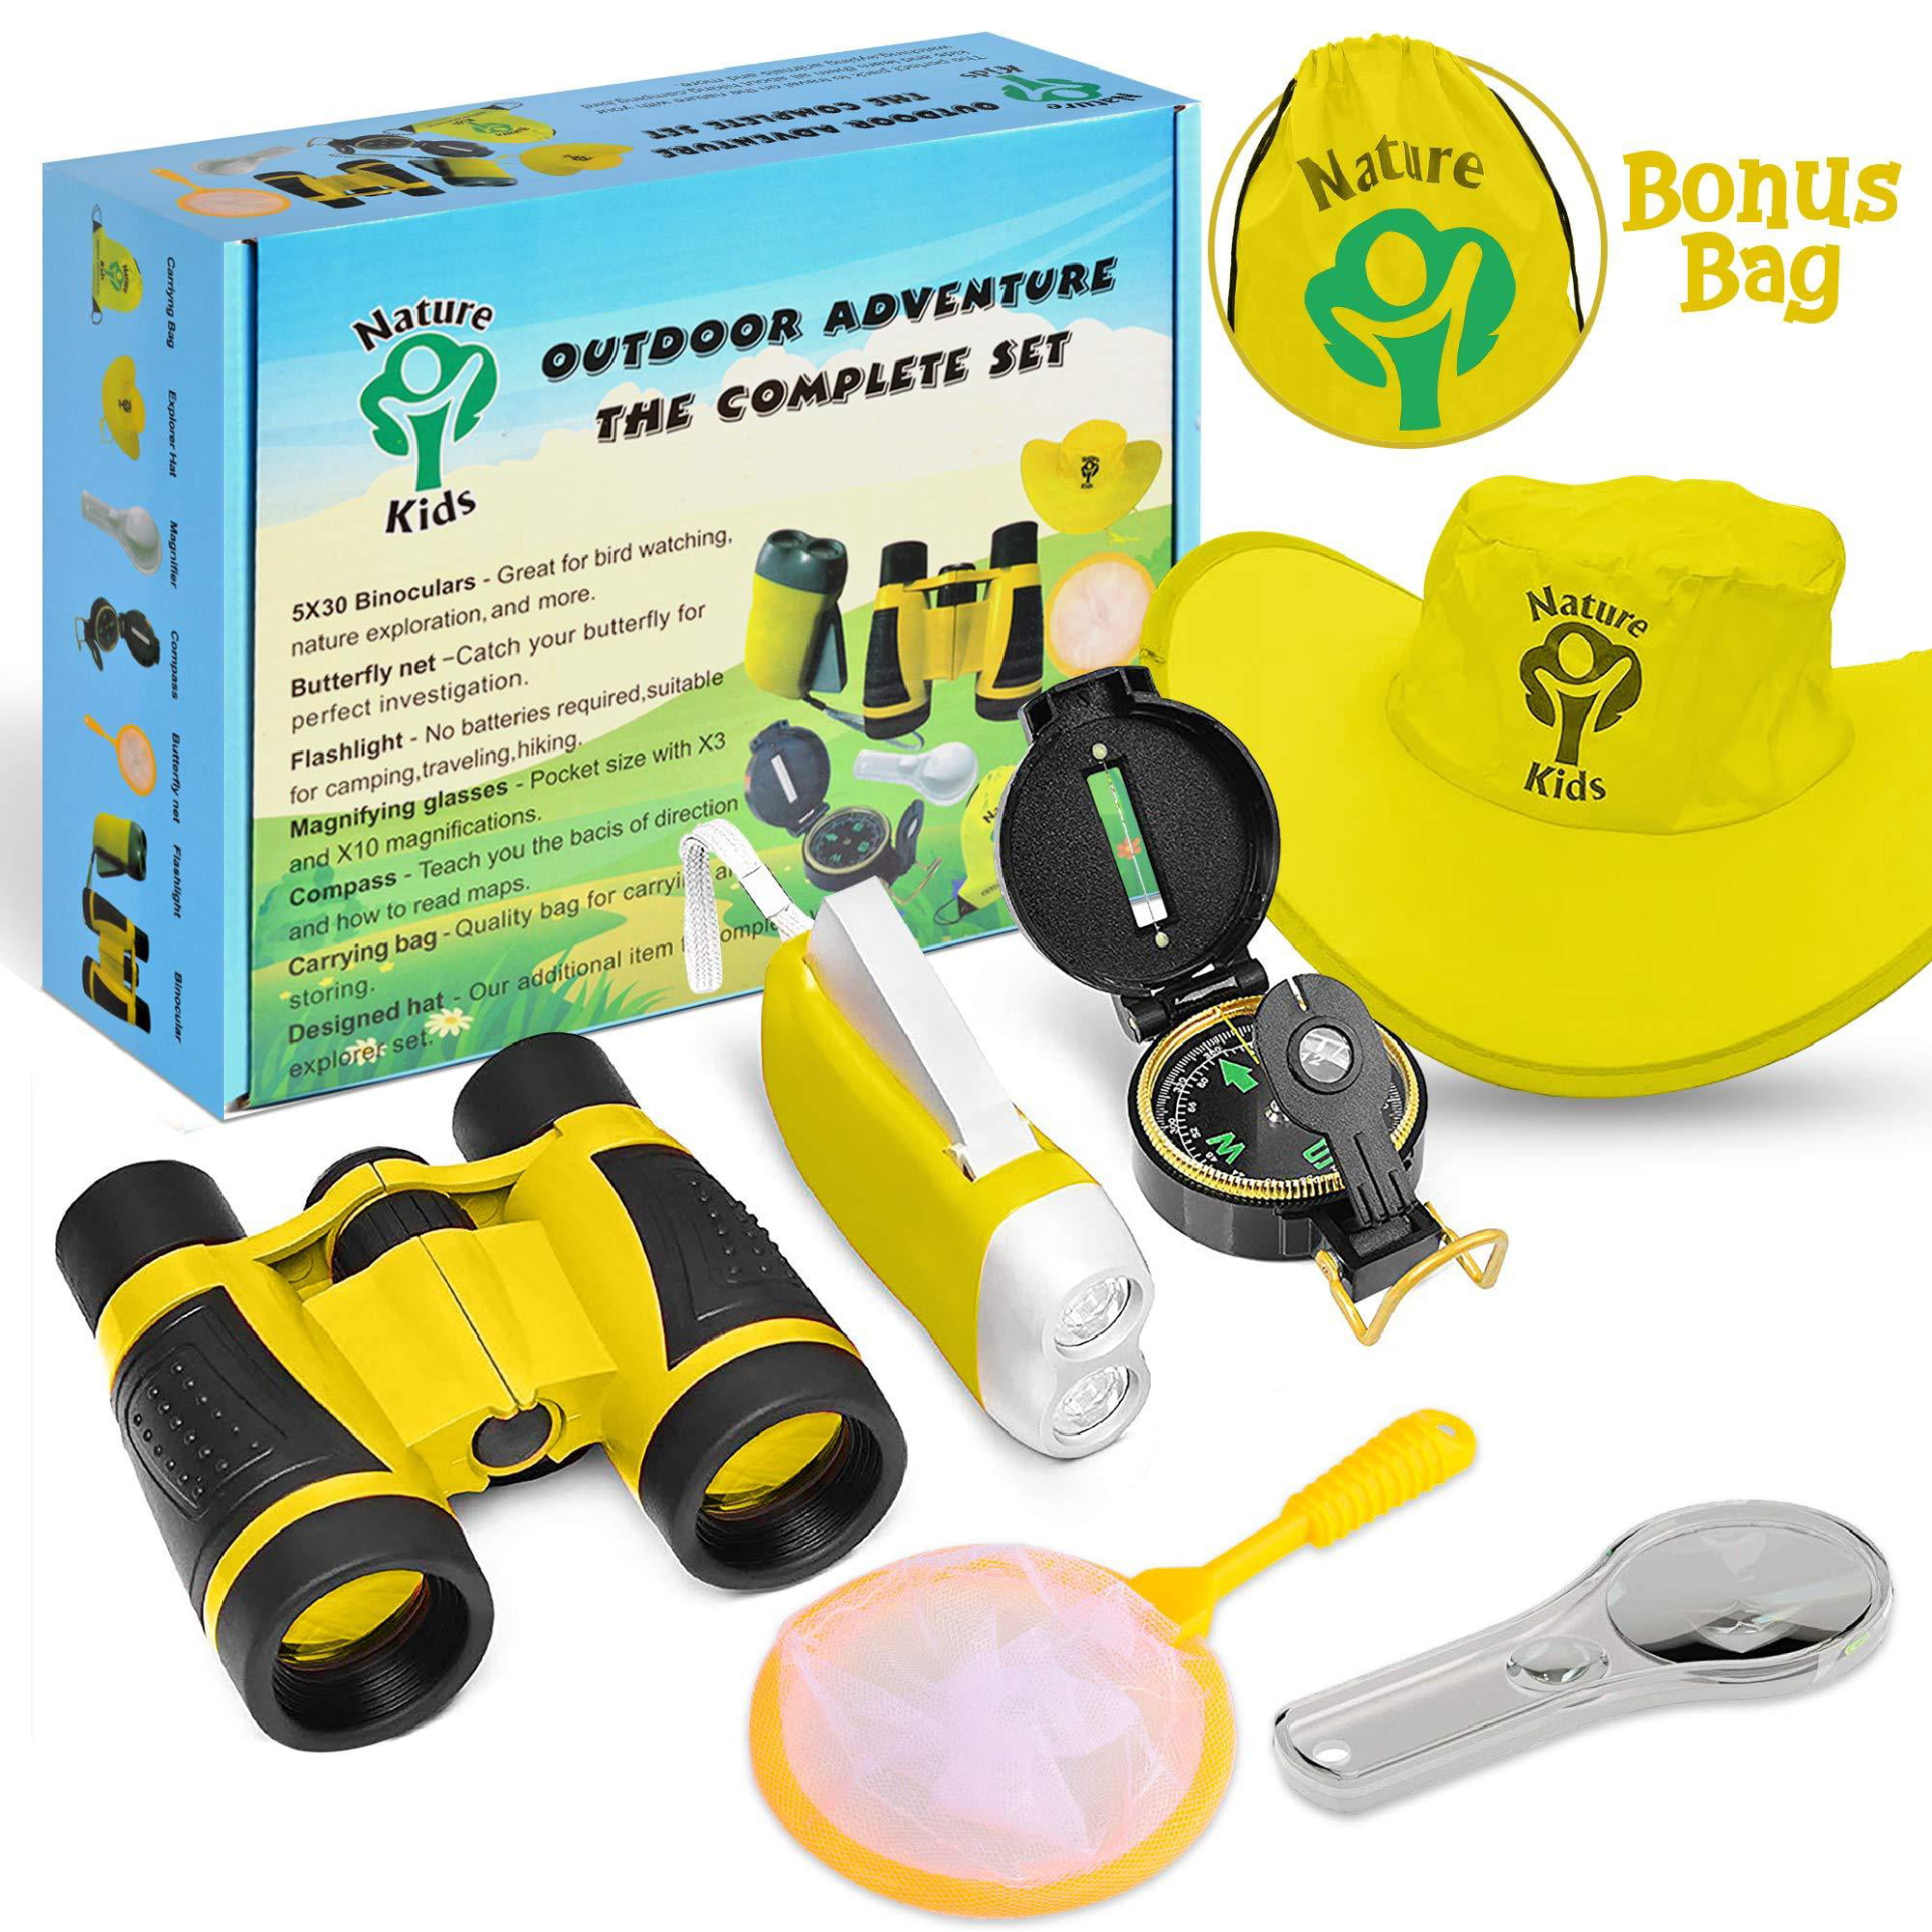 Compass Flashlight and Backpack Great Toys Kids Gift for Boys & Girls Age 3-12 Year Old Camping Hiking Whistle Magnifying Glass KIDCHEER Outdoor Explorer Kit & Bug Catcher Kit with Binoculars 